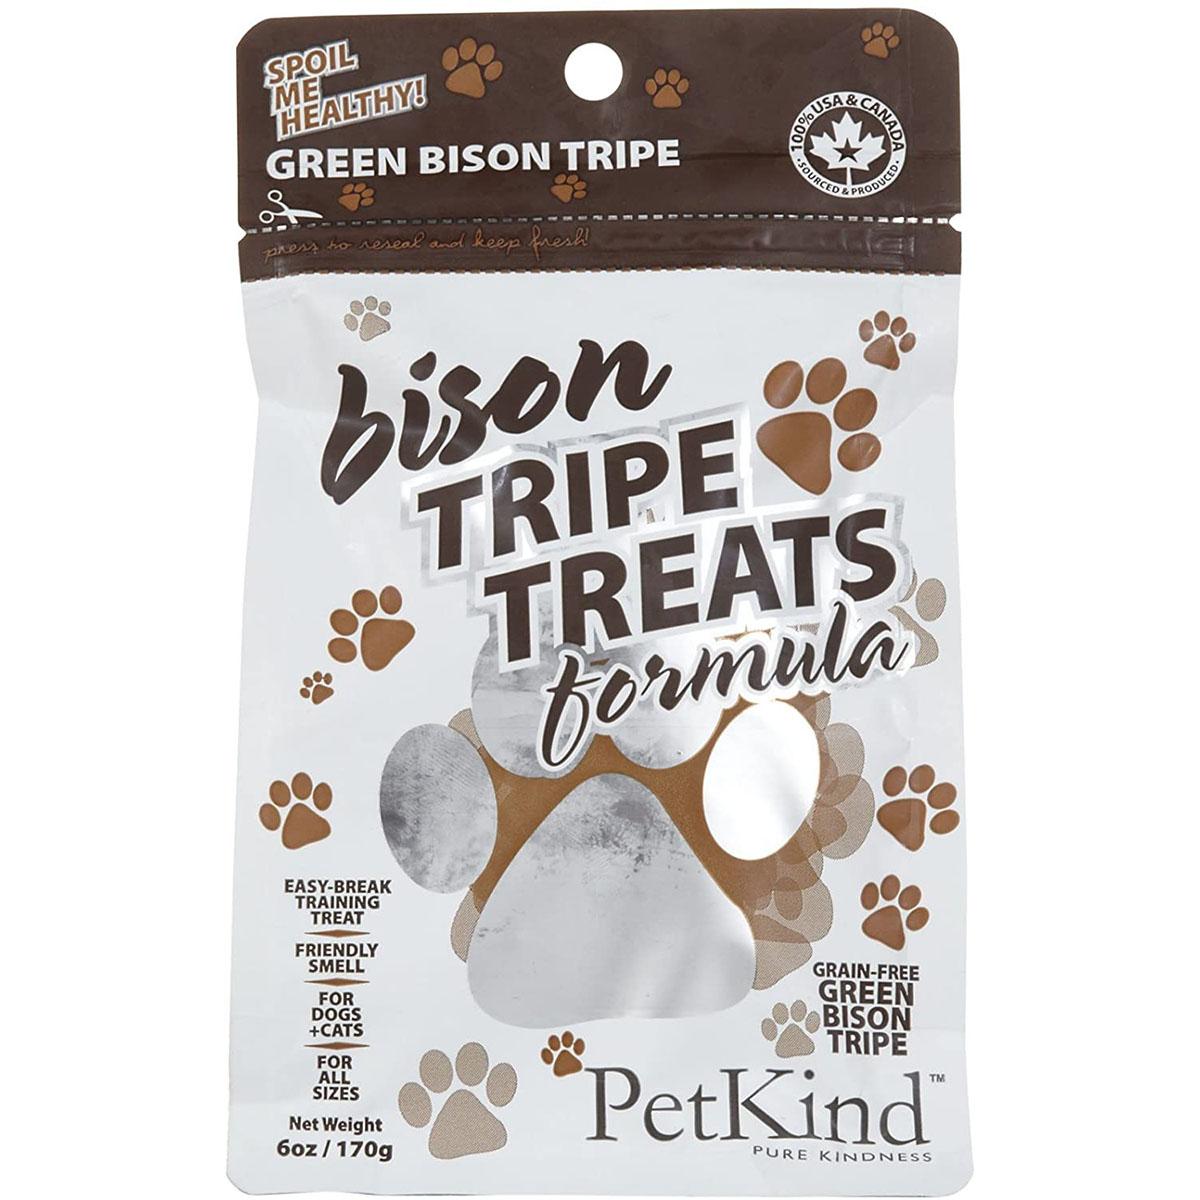 PetKind Grain-Free Green Bison Tripe Dog and Cat Treats